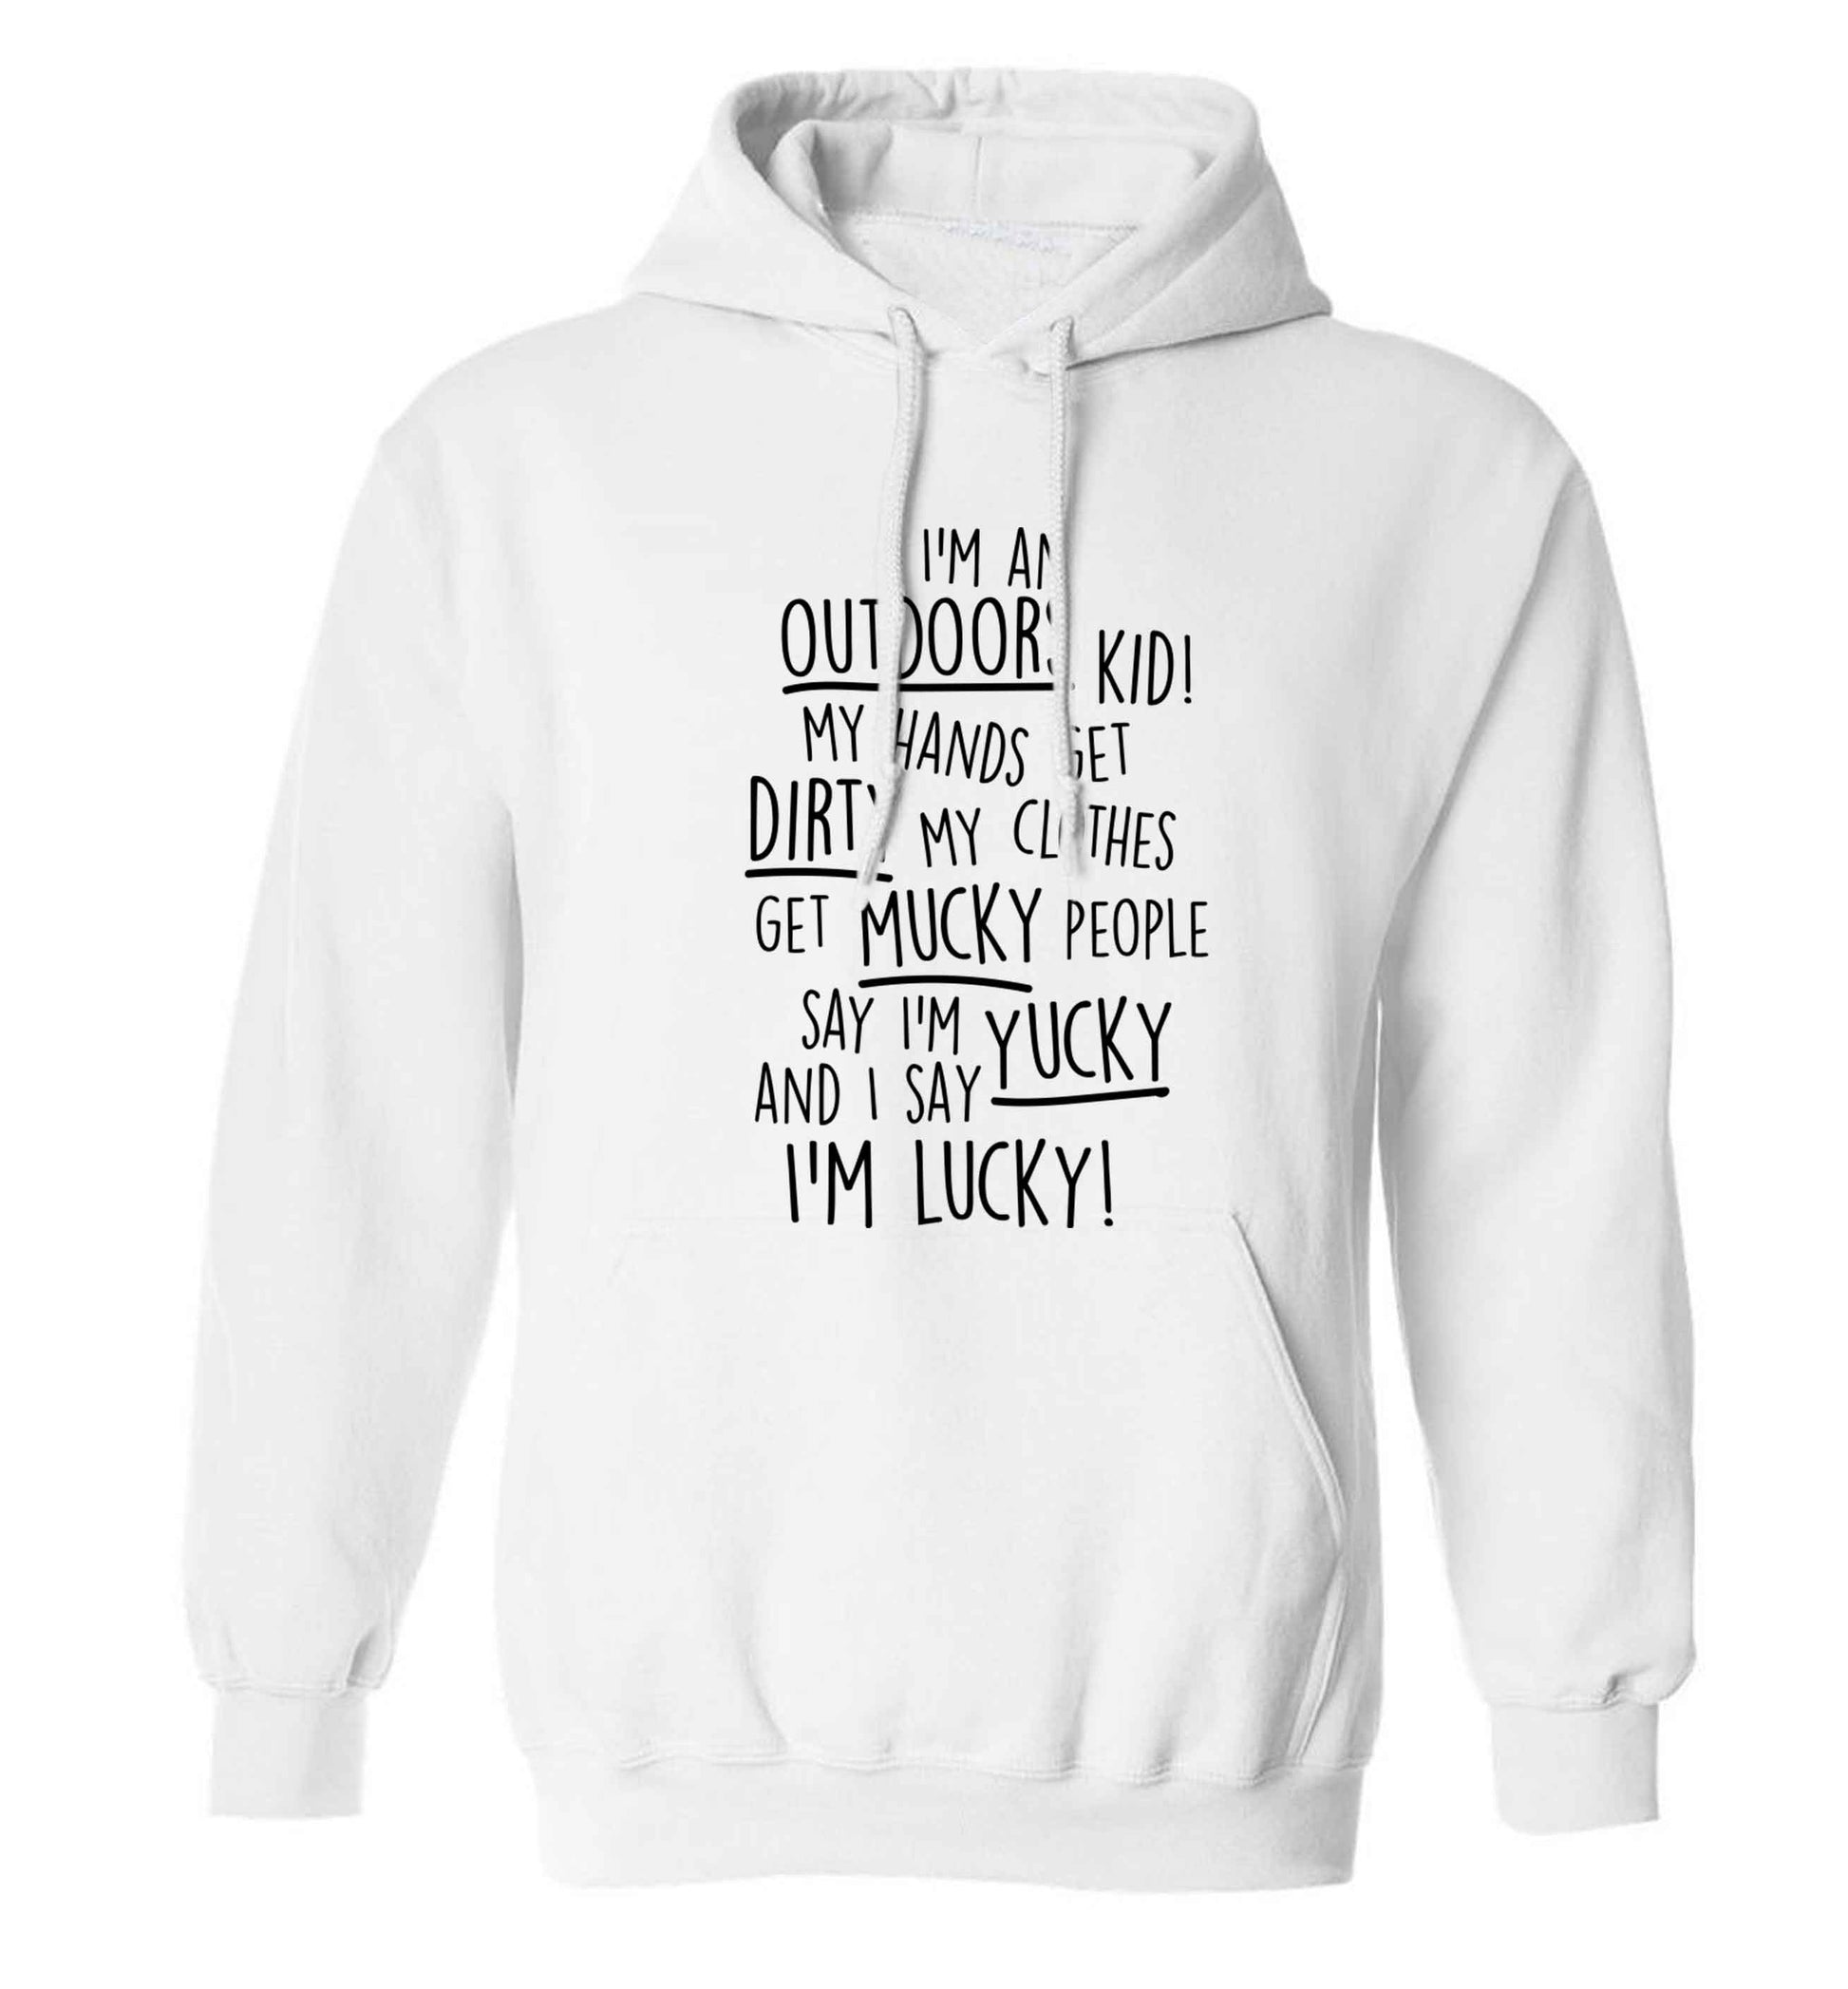 I'm an outdoors kid poem adults unisex white hoodie 2XL